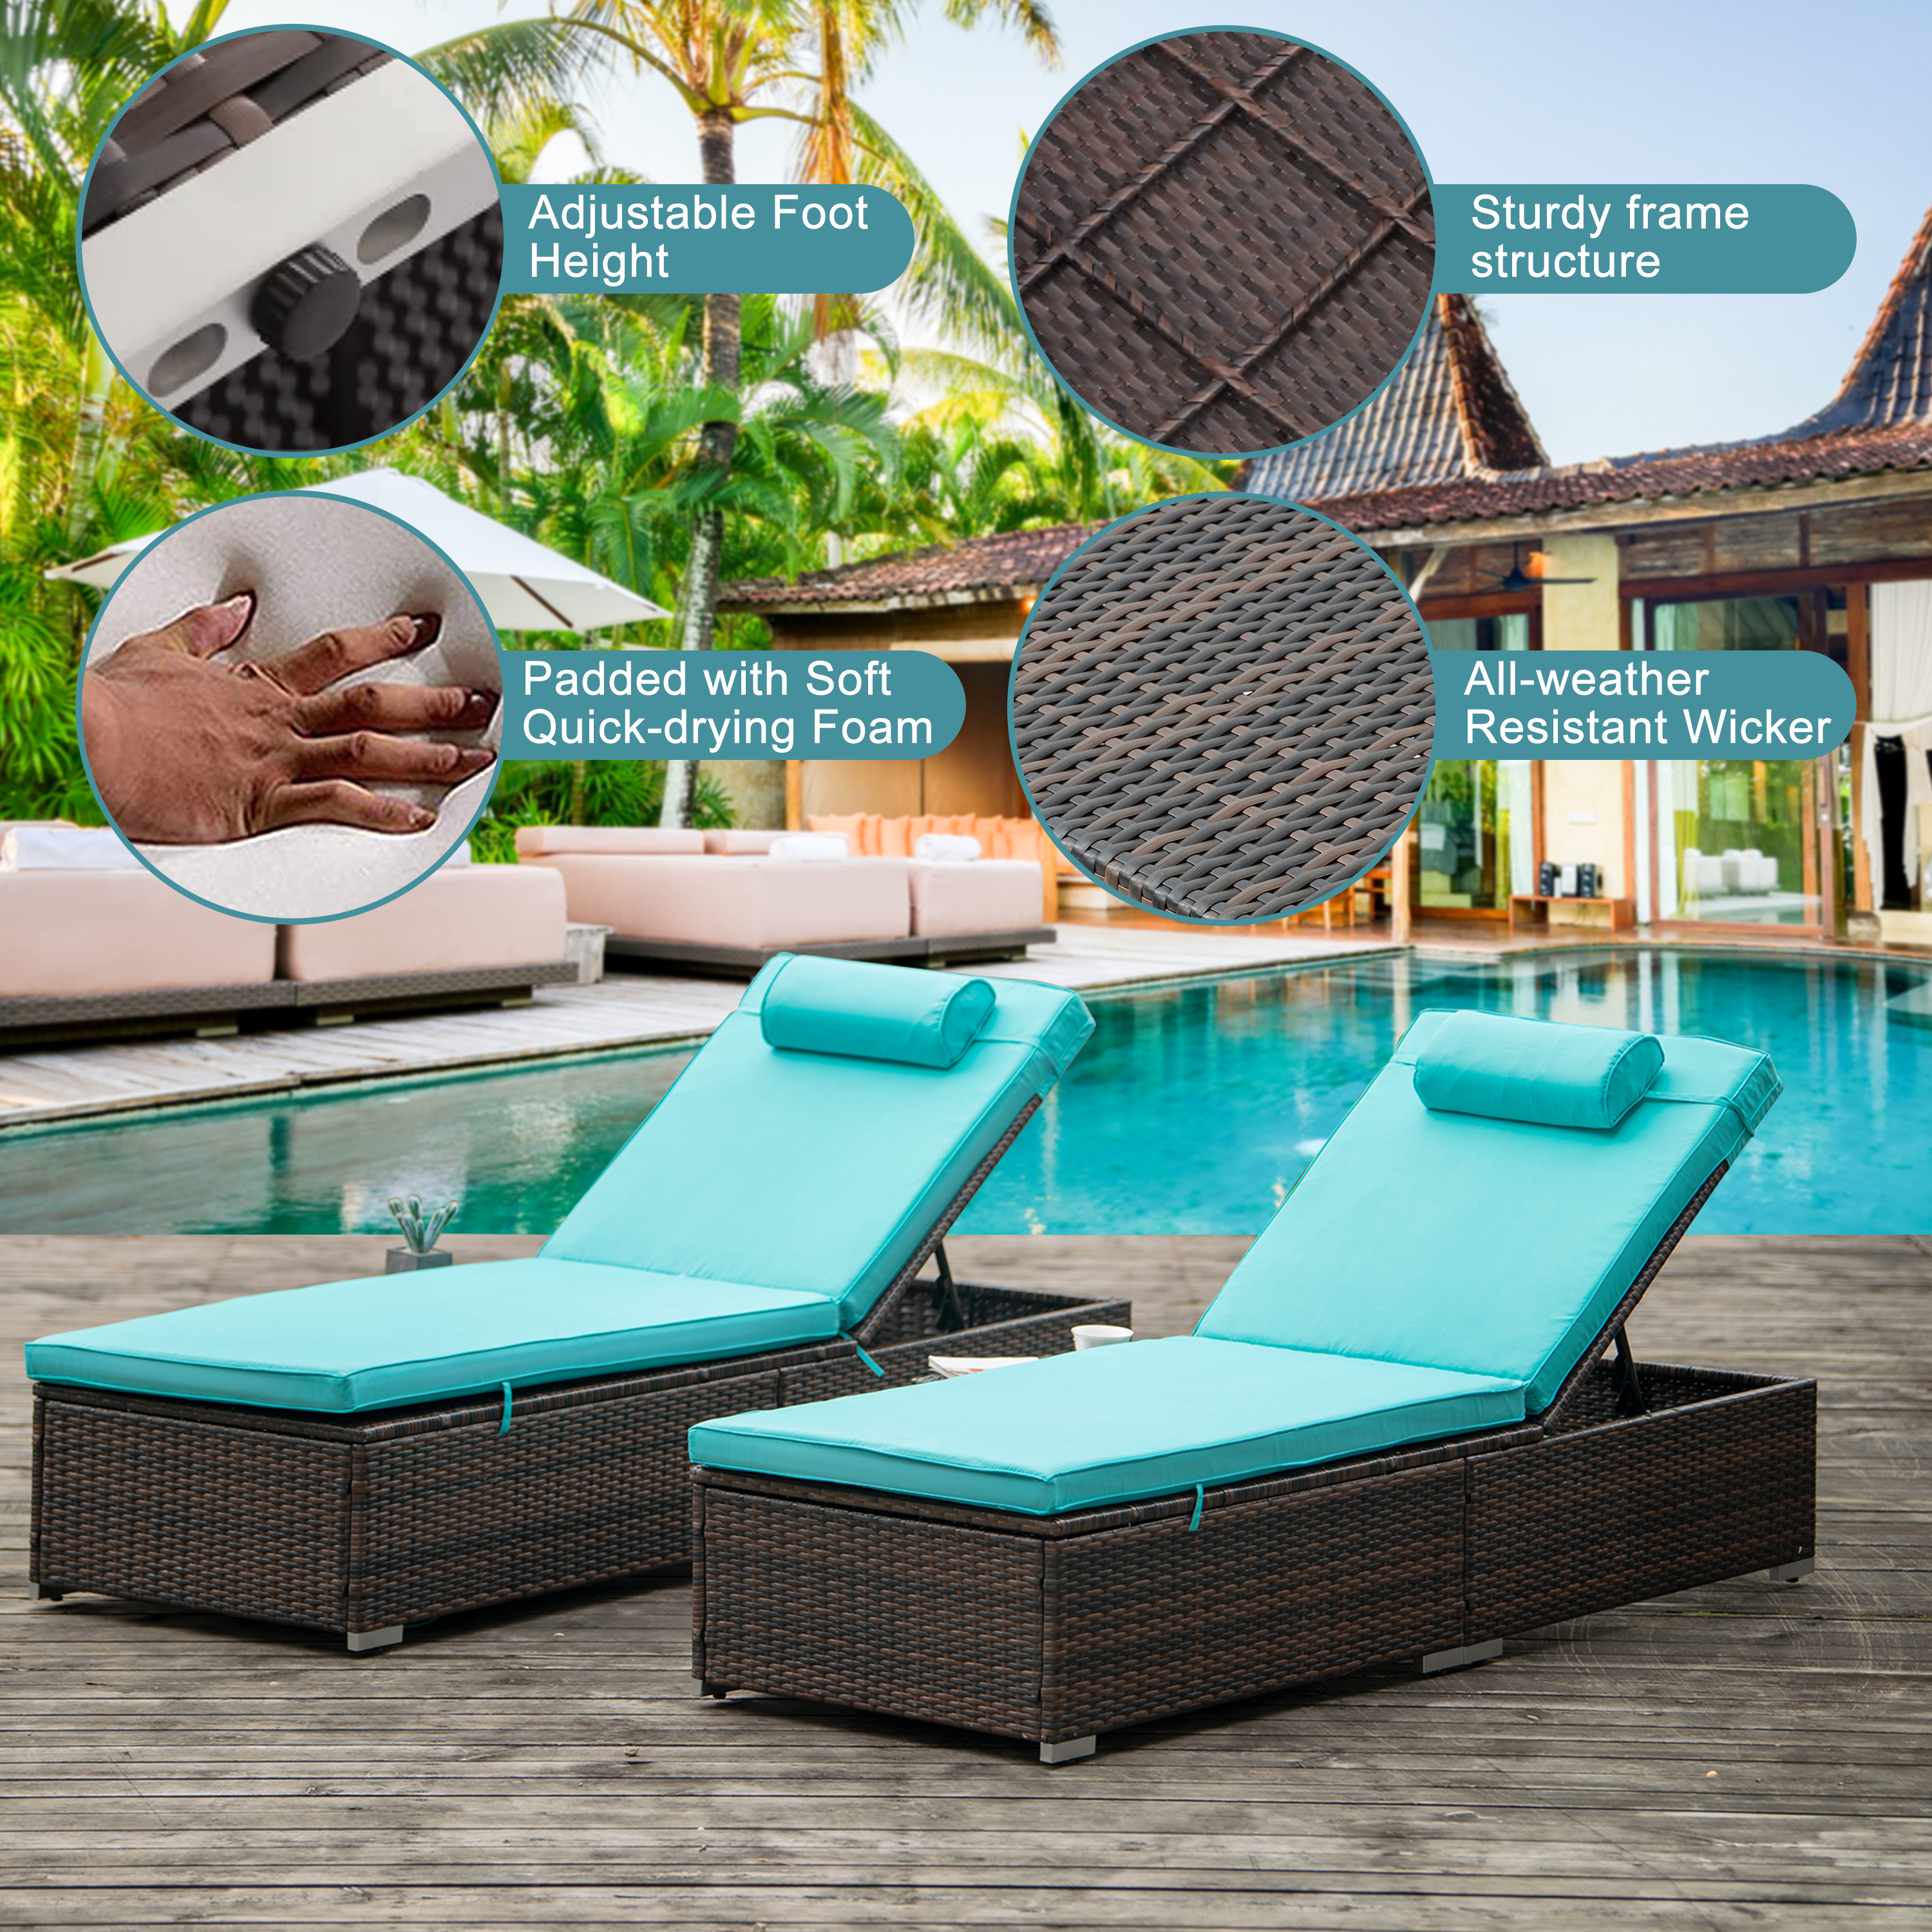 Segmart Outdoor Patio Chaise Lounge Chairs Furniture Set, PE Rattan Wicker Beach Pool Lounge Chair with Side Table, Adjustable 5 Position, Reclining Chaise Chairs, Blue, SS2344 - image 3 of 8